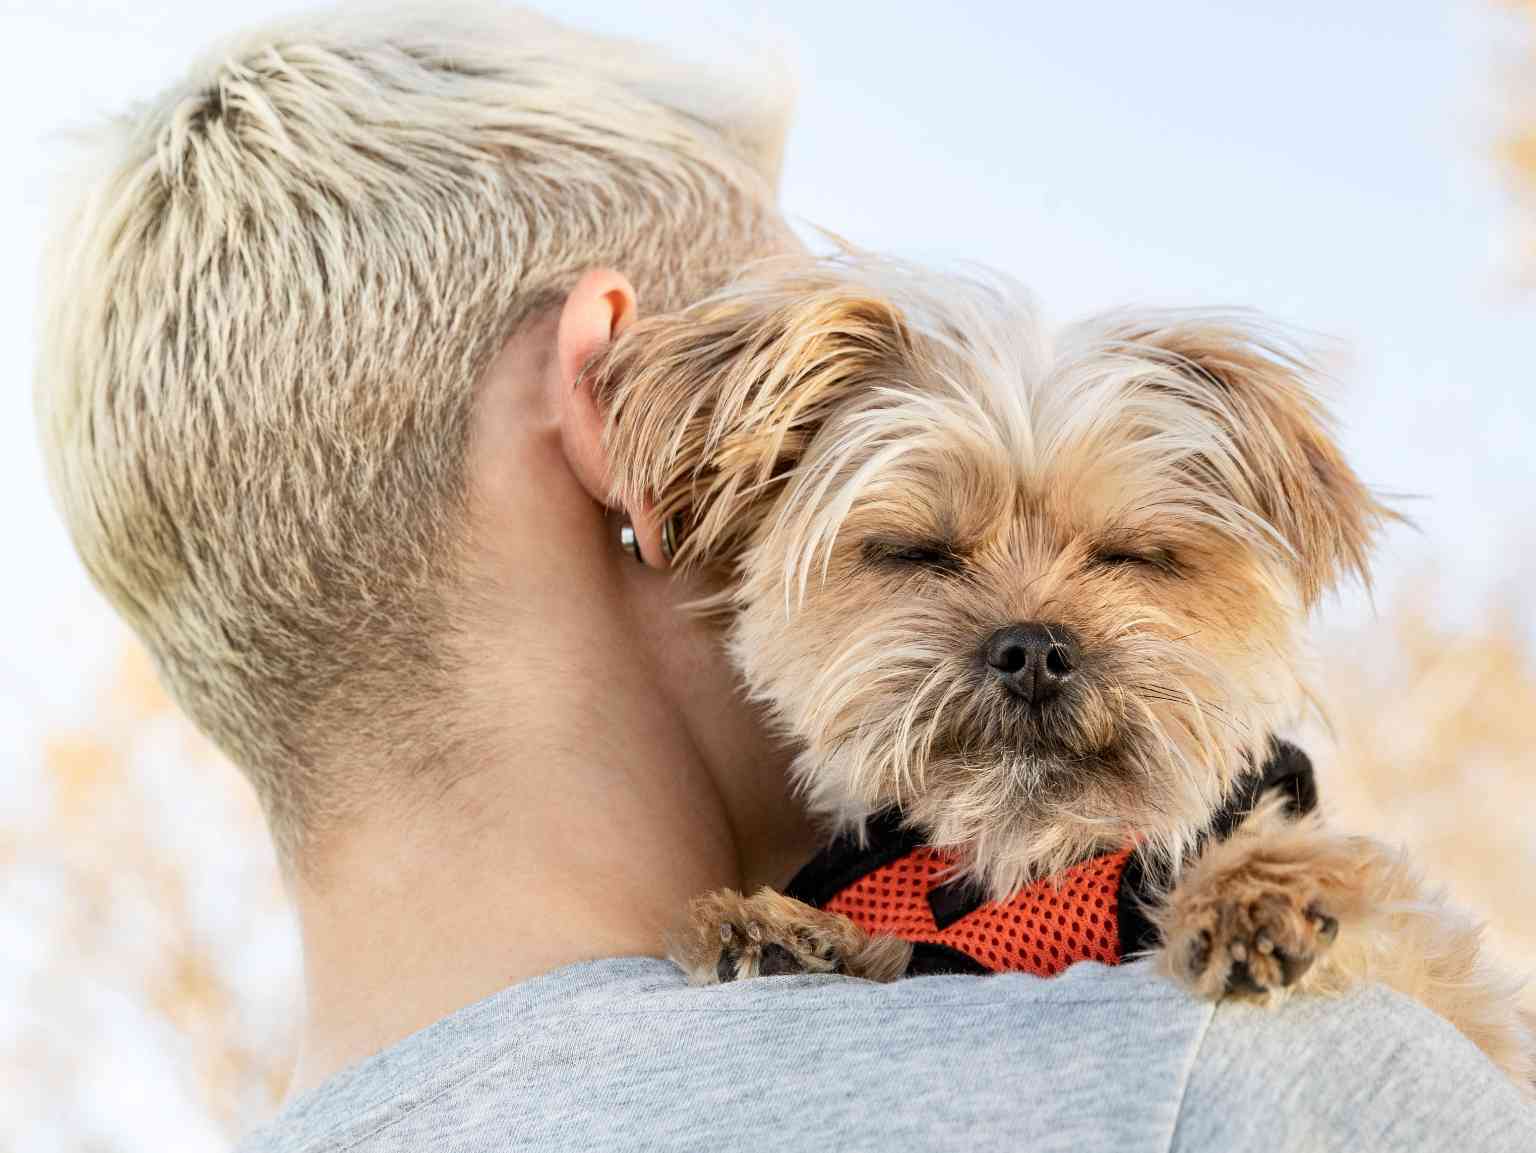 A puppy sleeping on its owner's shoulder